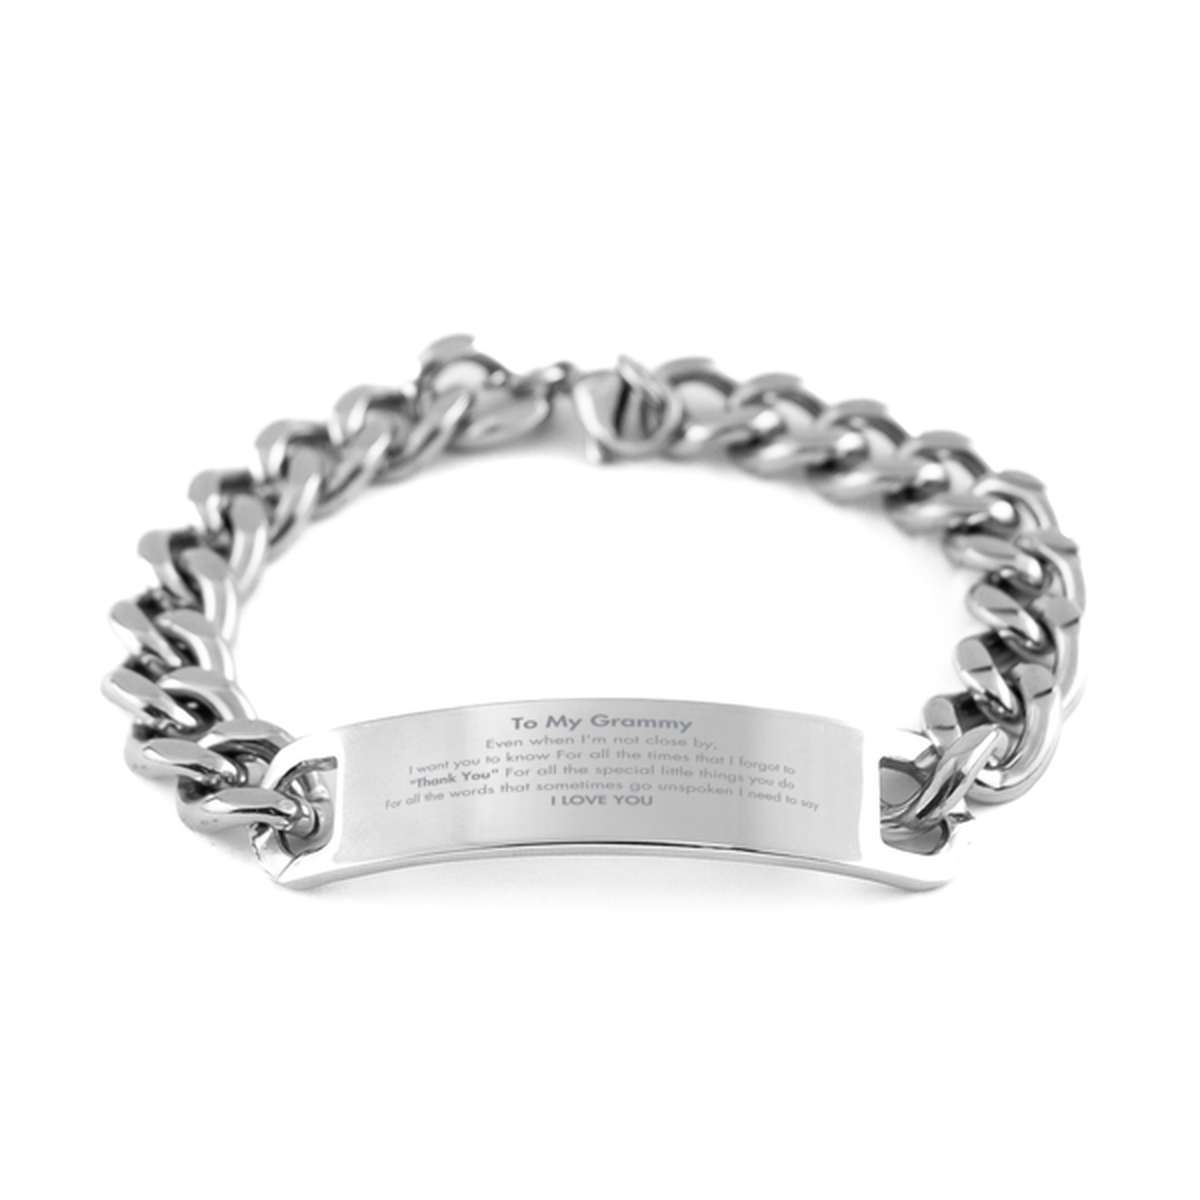 Thank You Gifts for Grammy, Keepsake Cuban Chain Stainless Steel Bracelet Gifts for Grammy Birthday Mother's day Father's Day Grammy For all the words That sometimes go unspoken I need to say I LOVE YOU